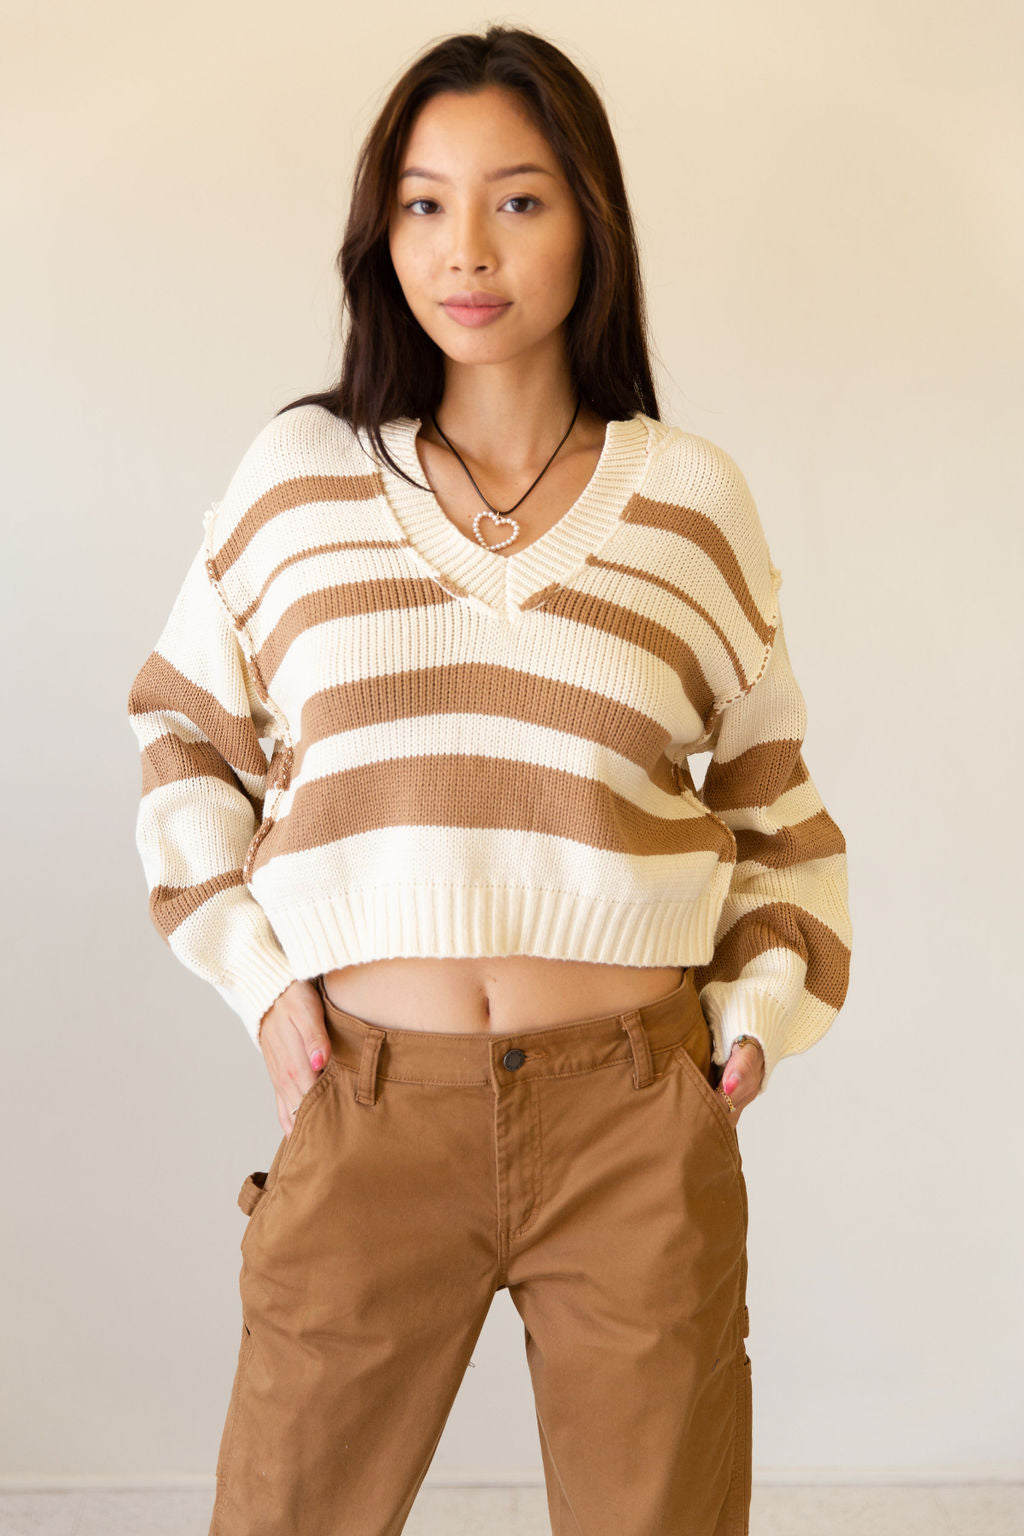 This Time Crochet Crop Sweater